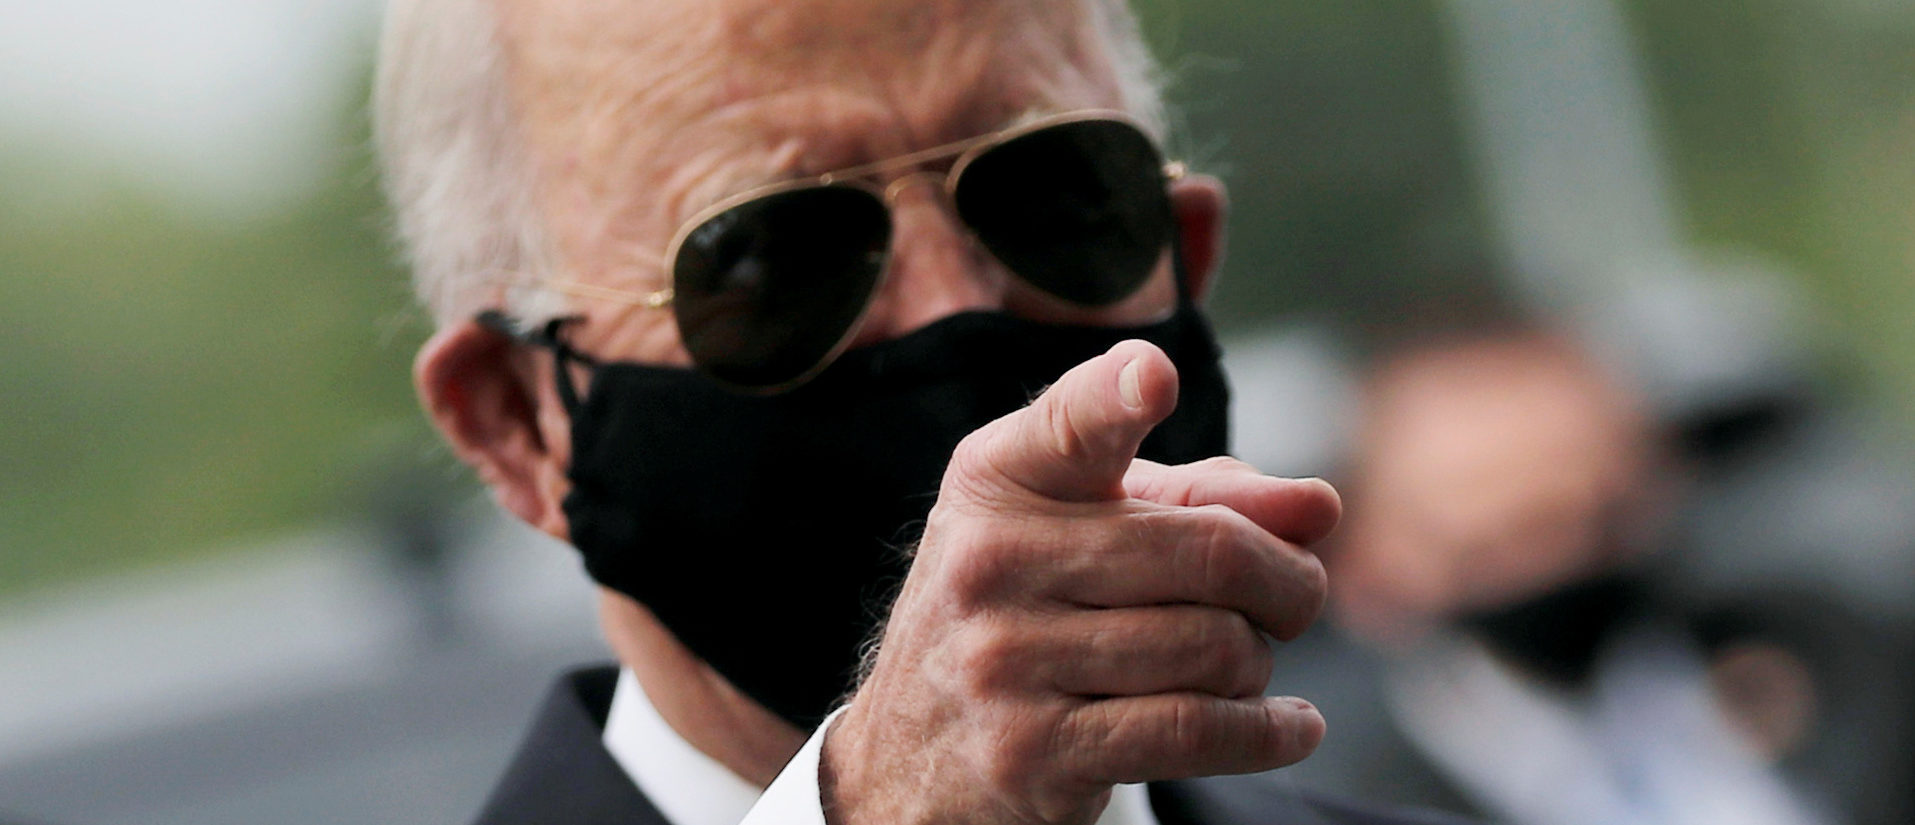 Democratic U.S. presidential candidate and former Vice President Joe Biden is seen at War Memorial Plaza during Memorial Day, amid the outbreak of the coronavirus disease (COVID-19), in New Castle, Delaware, U.S. May 25, 2020. REUTERS/Carlos Barria